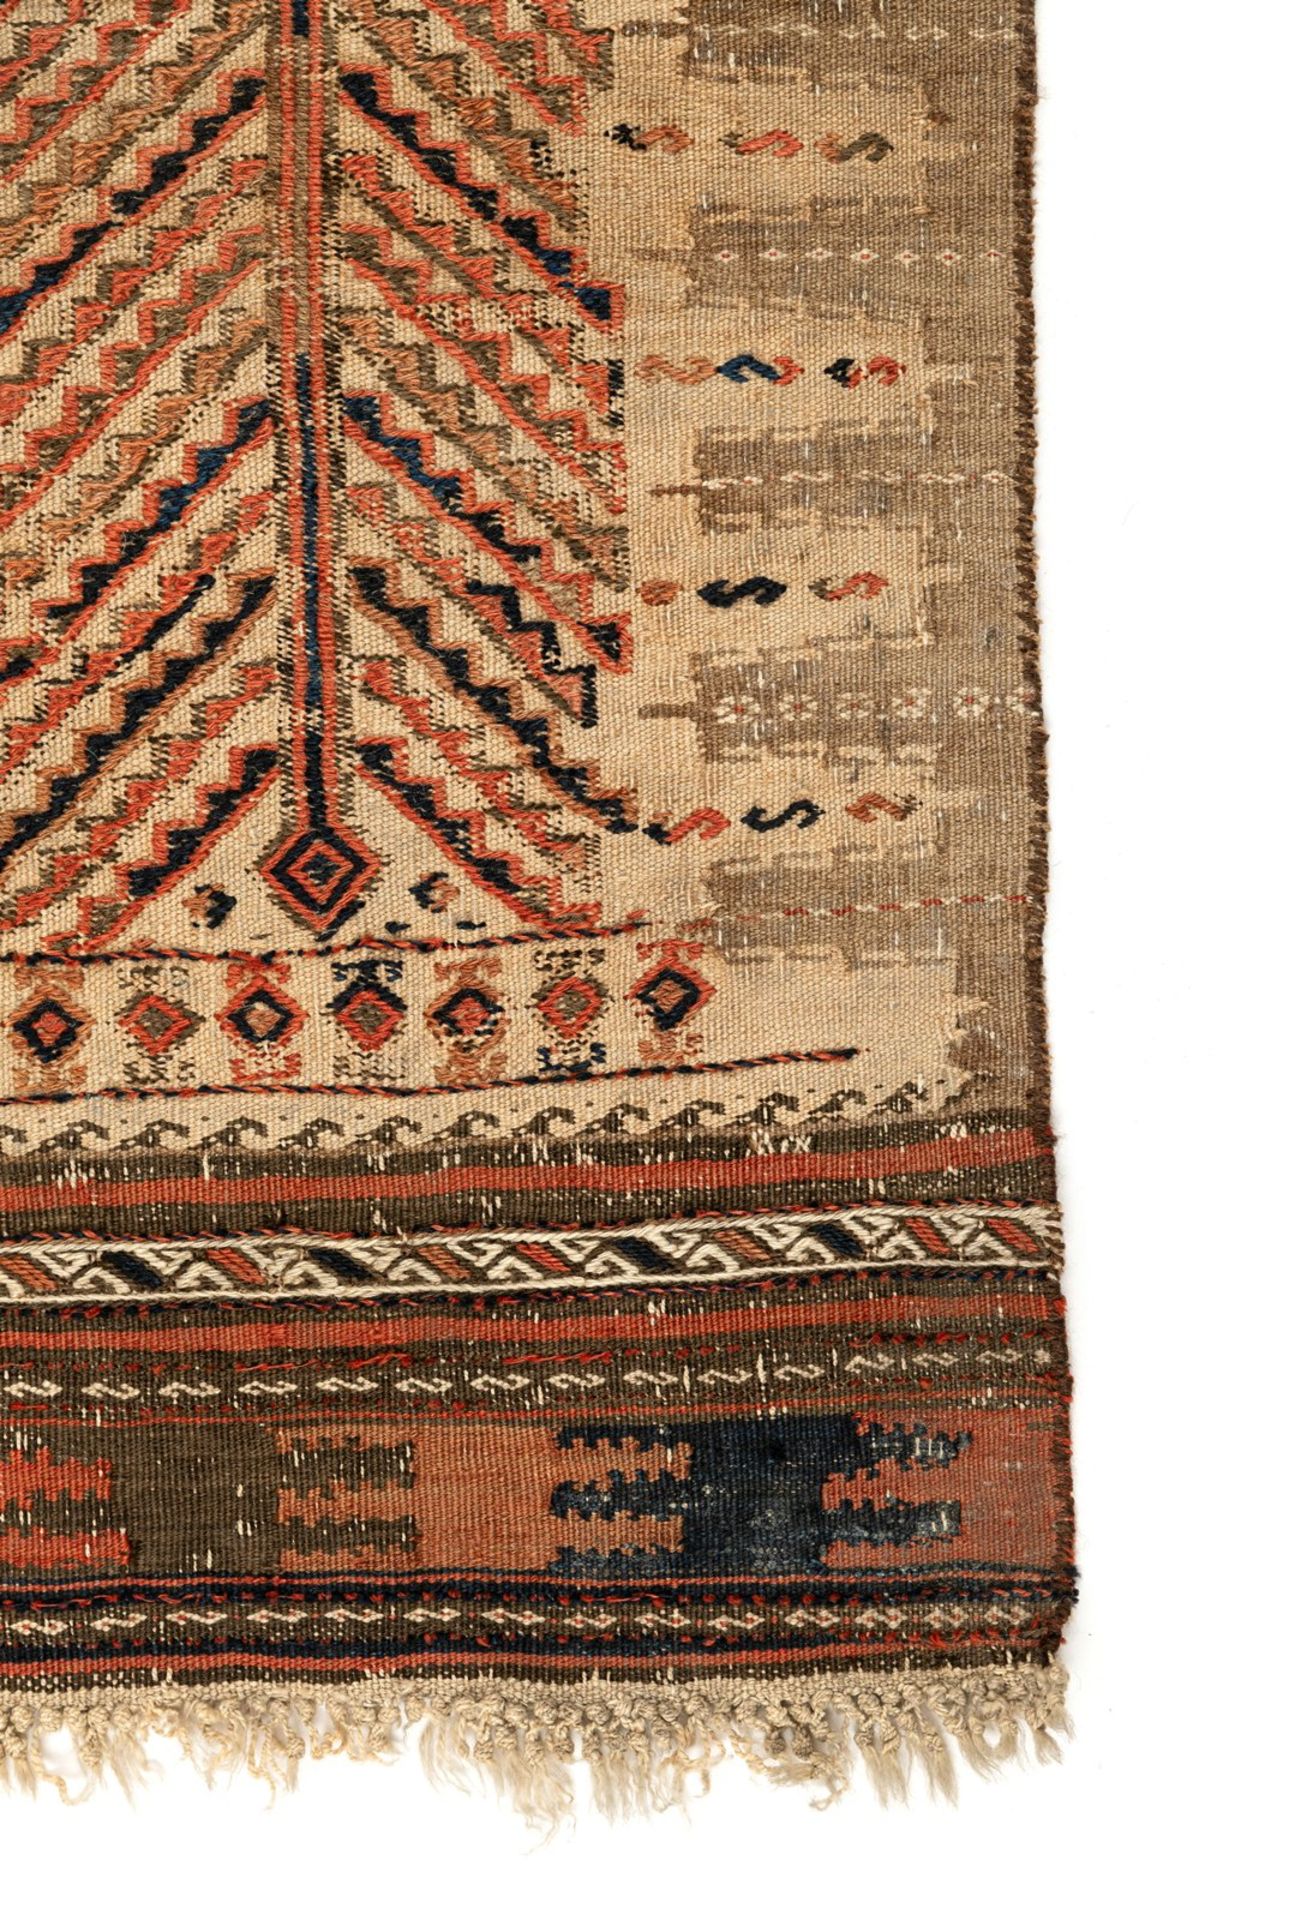 Flat weave, Baluch - Image 2 of 7